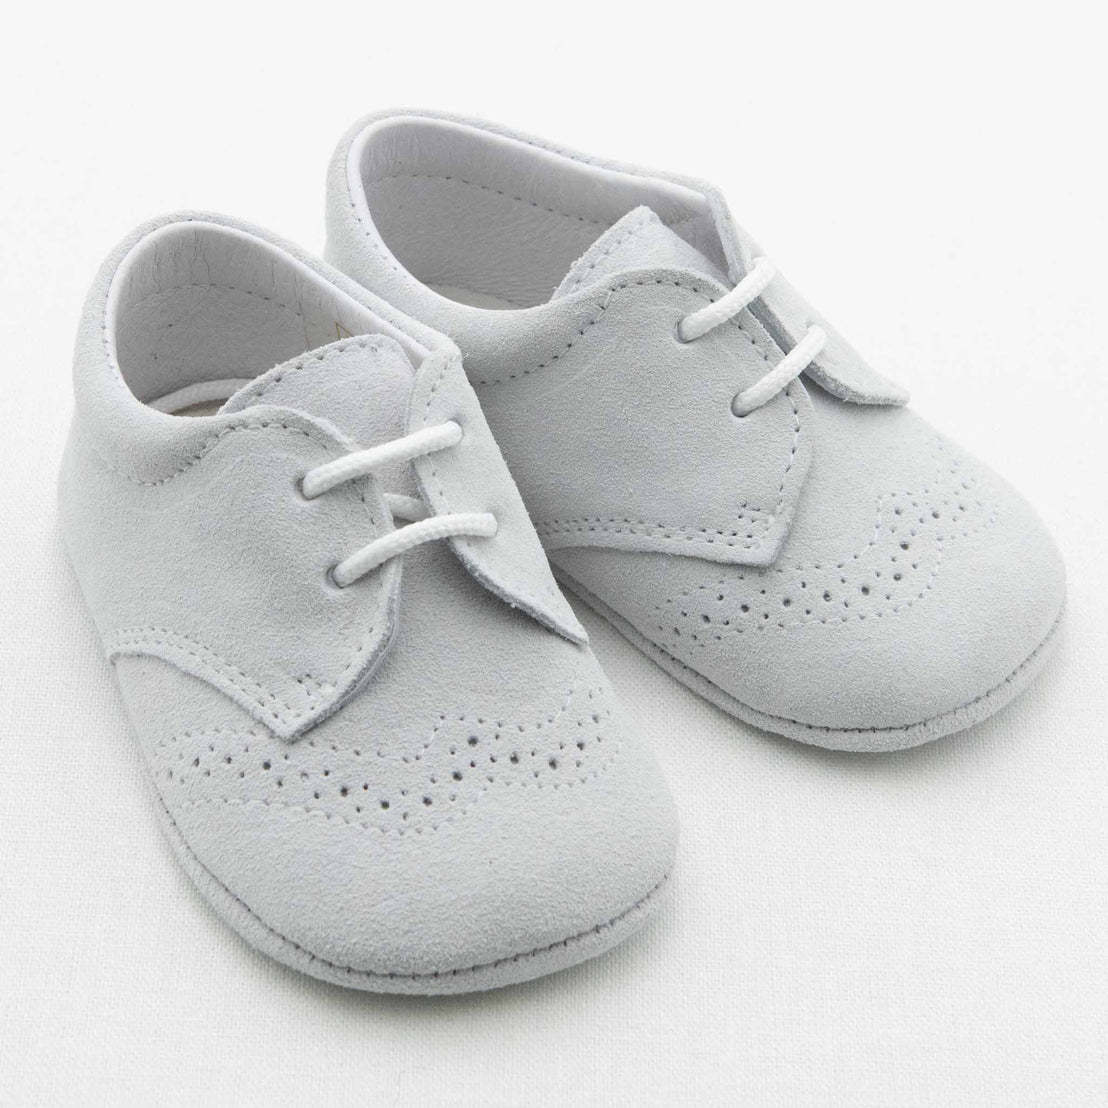 A pair of Miles Suede Shoes by Baby Beau & Belle, featuring dove grey suede with decorative perforations on the toes and sides. Handmade in Spain, these infant shoes have white laces and soft soles, ideal for babies. The background is a plain white surface.